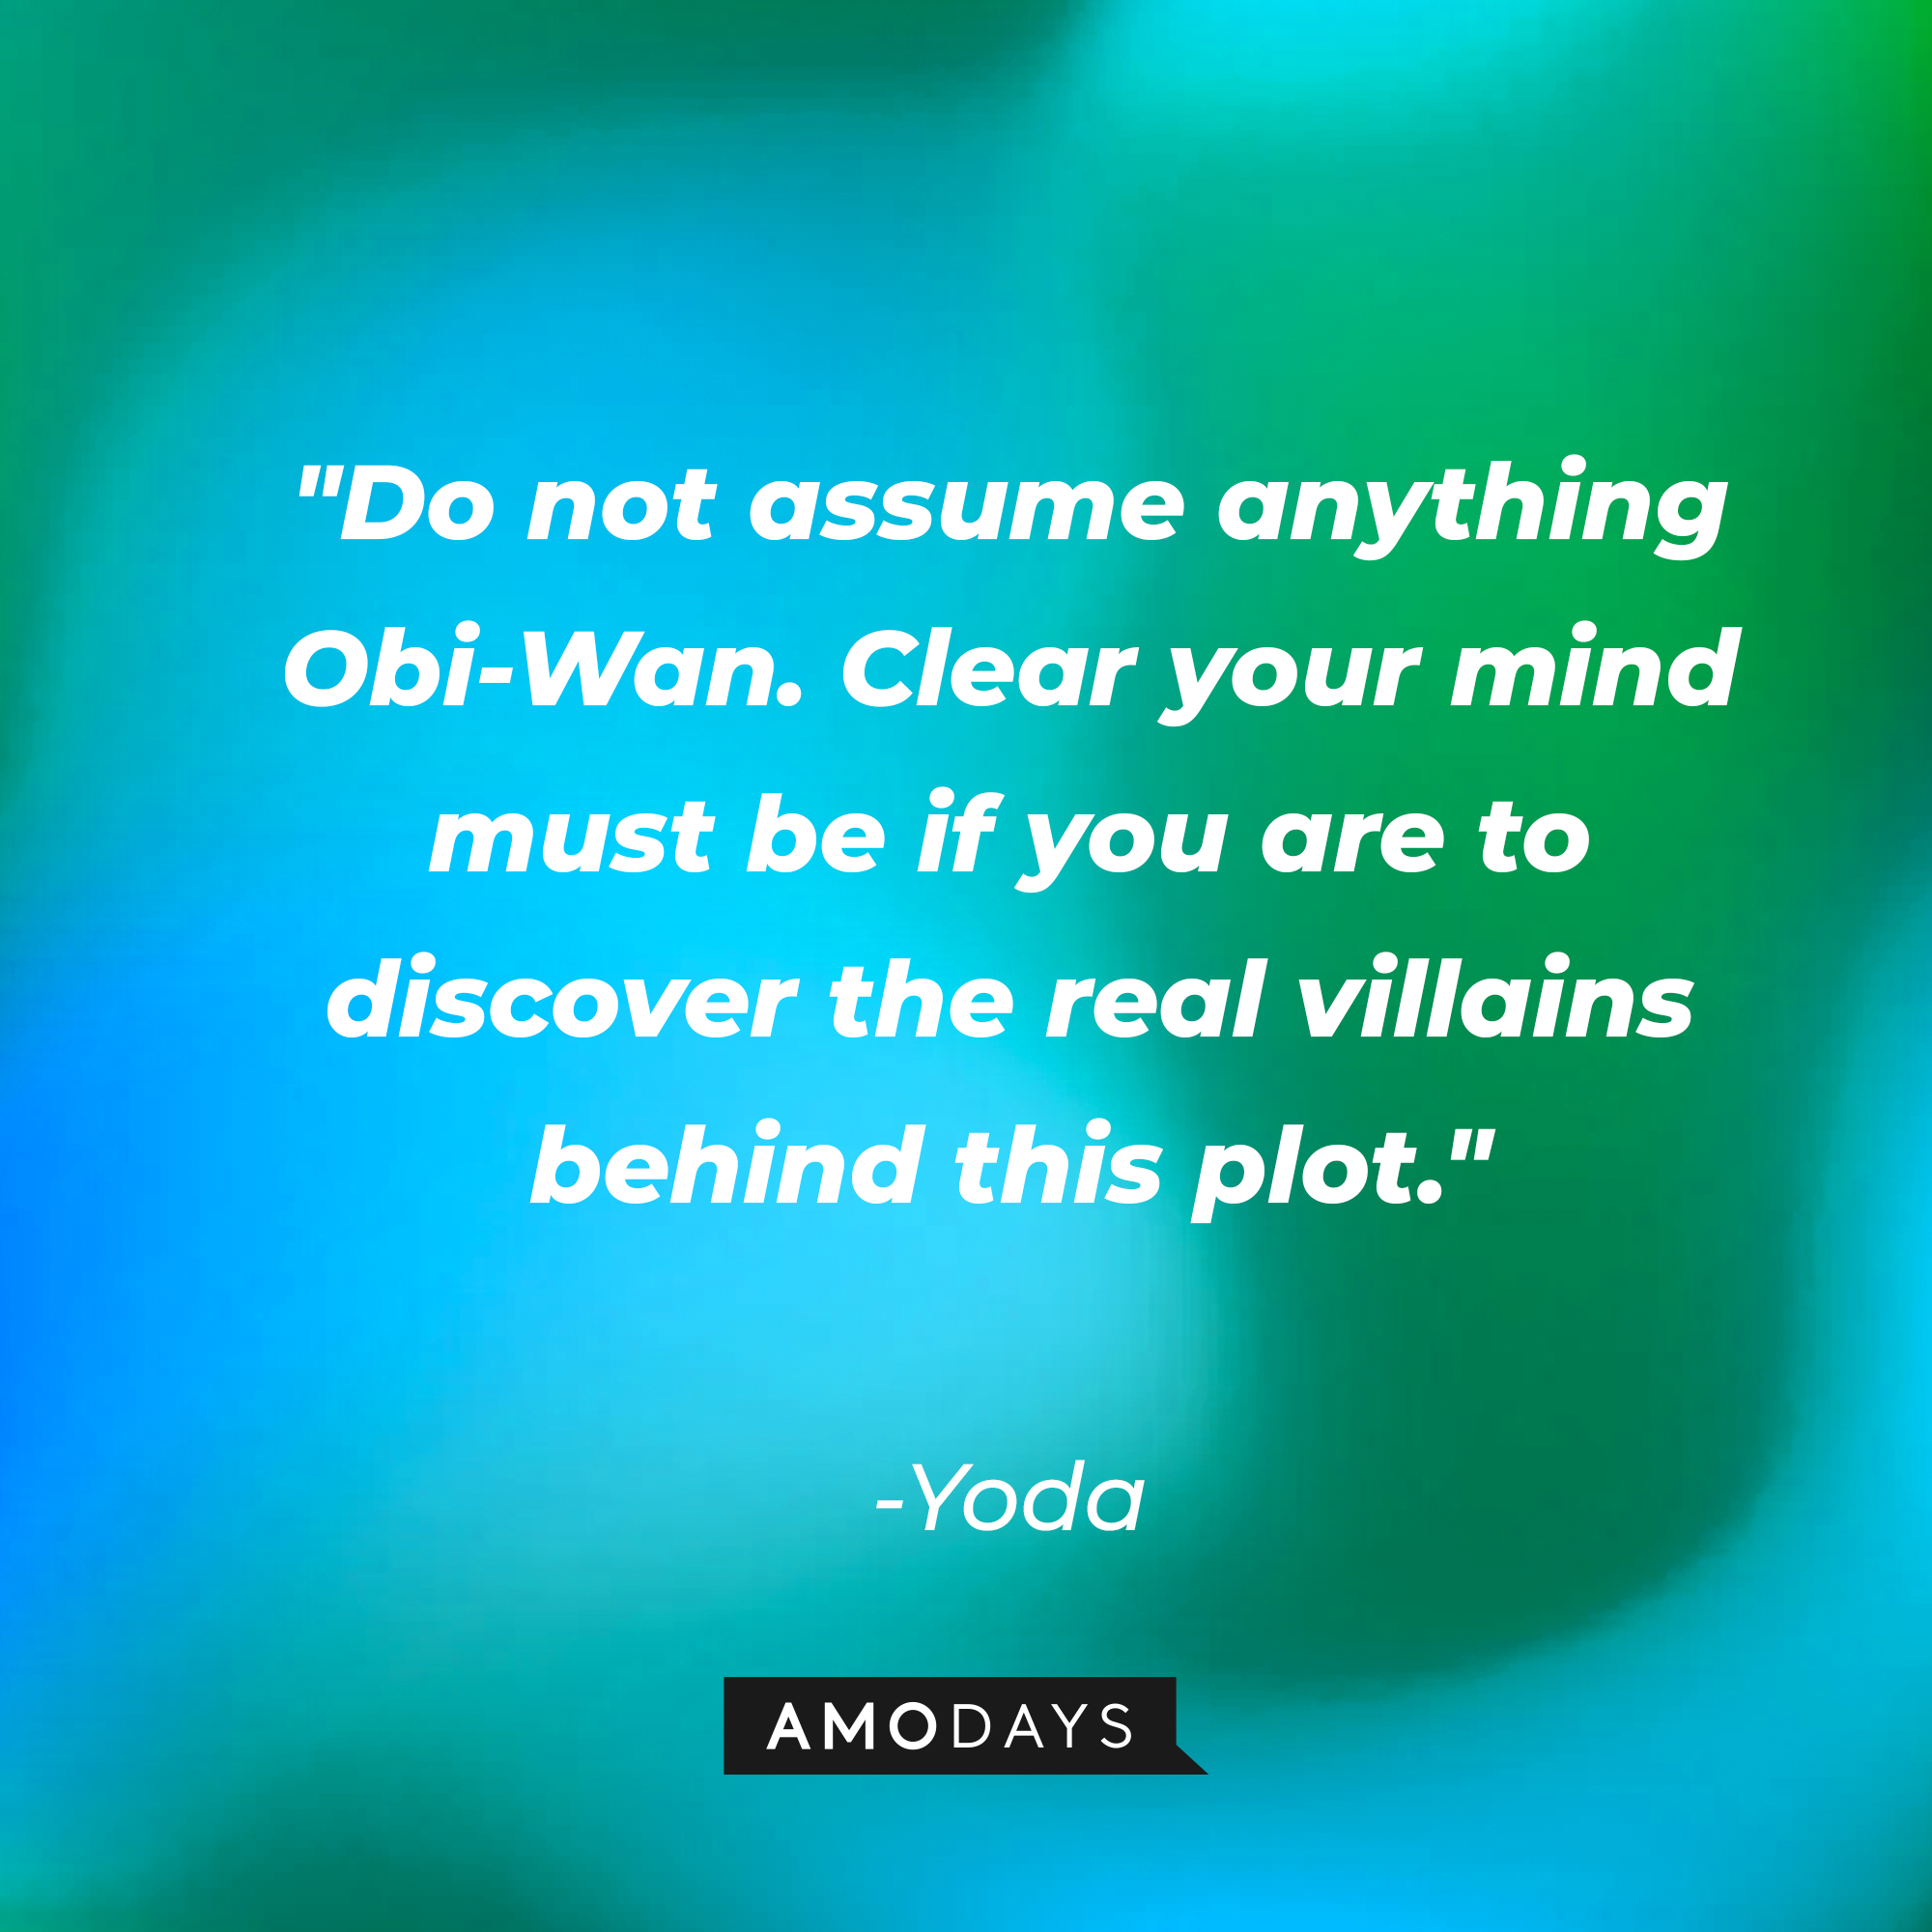 Yoda's quote: "Do not assume anything Obi-Wan. Clear your mind must be if you are to discover the real villains behind this plot." | Source: AmoDays